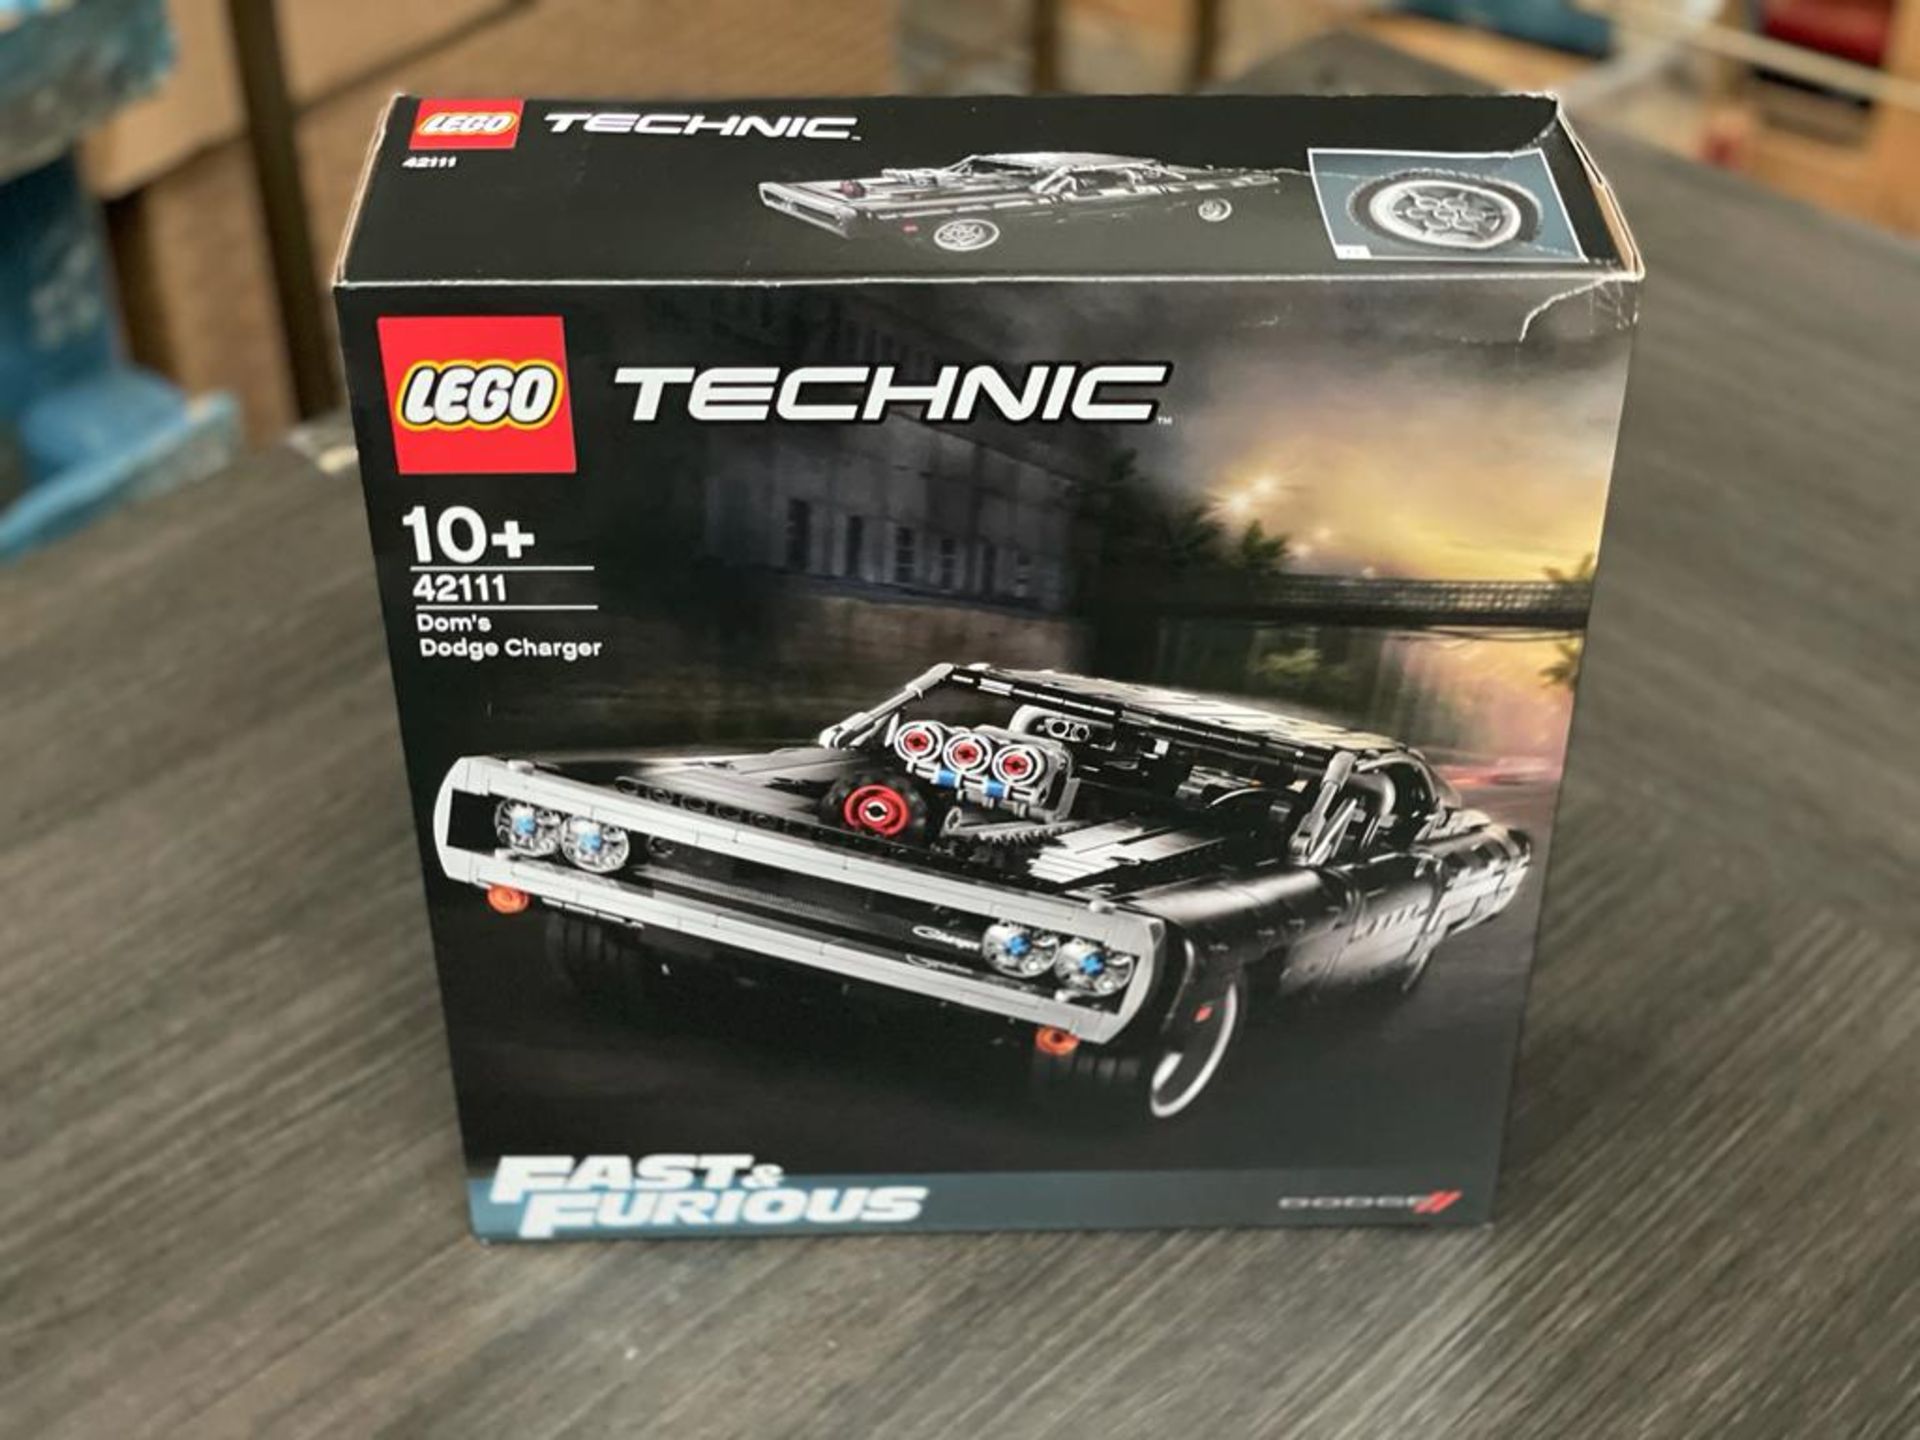 1 x Lego 42111 Technic Fast And Furious Dom's Dodge Charger - Brand New - RRP £89.99 - CL987 - - Image 2 of 4